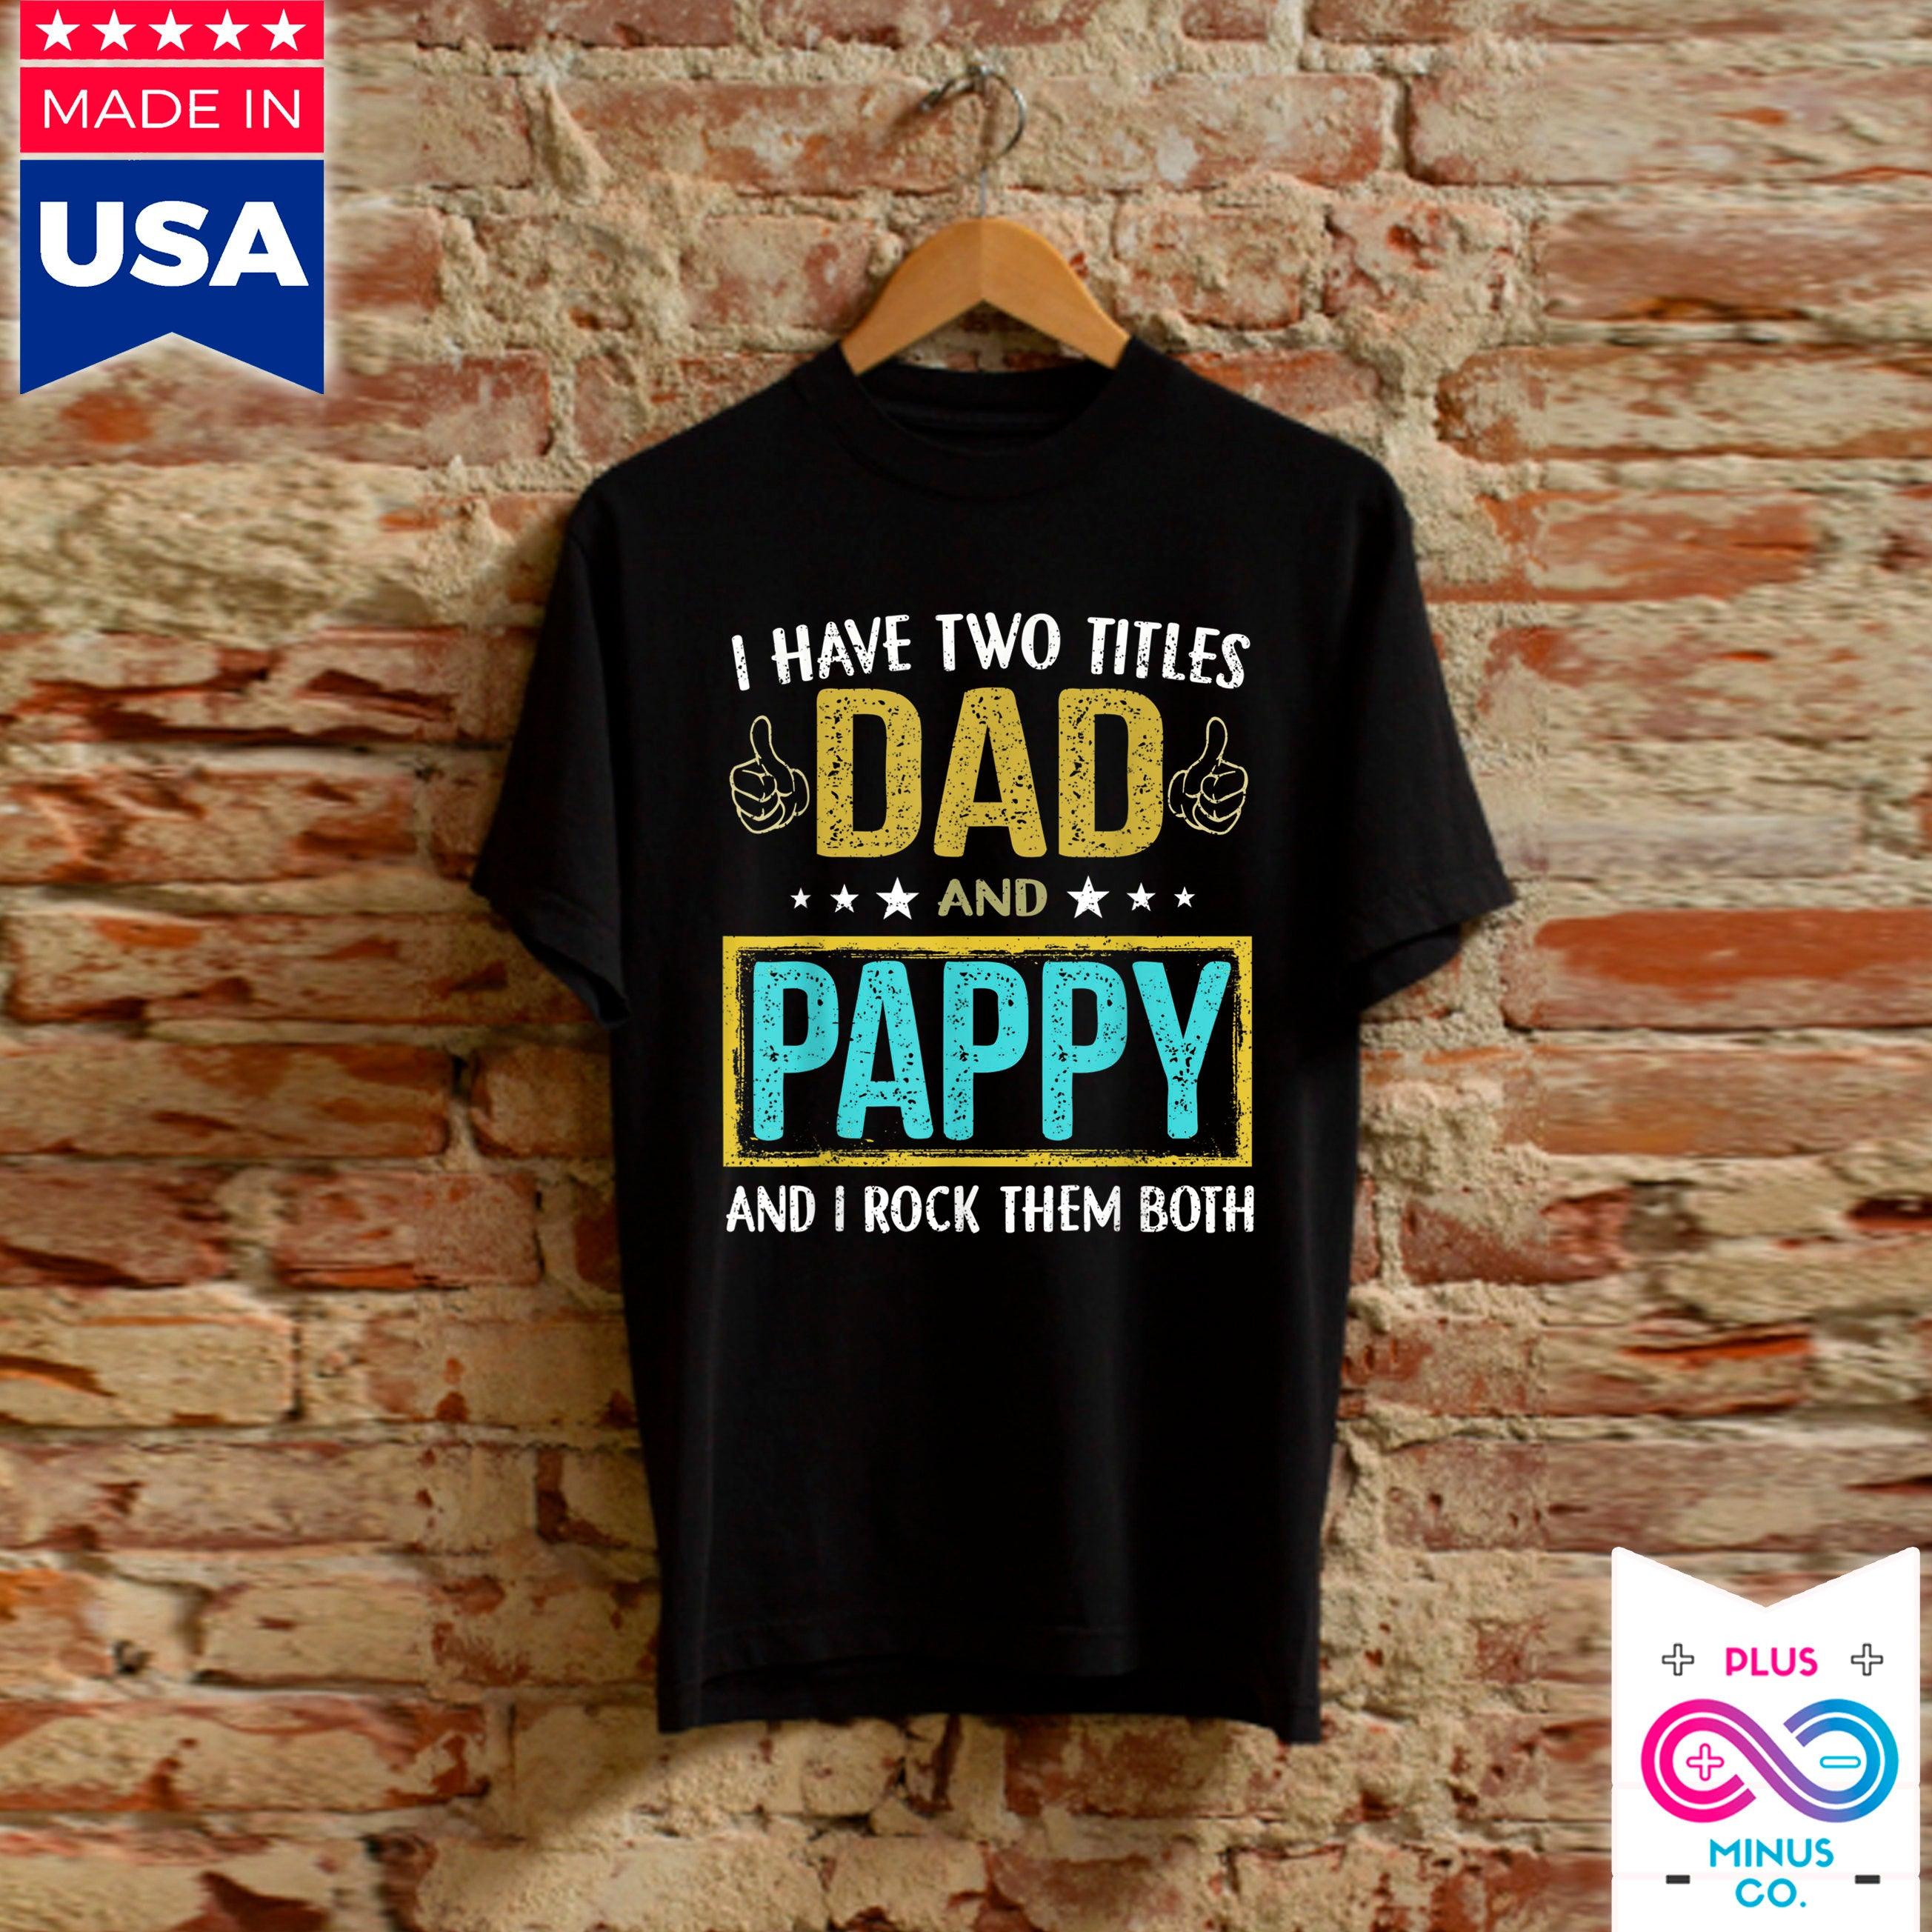 Men&#39;S I Have Two Titles Dad And Pappy - Gifts For Father T-Shirts,gifts from daughter to dad, fathers day gift,gifts from son to dad - plusminusco.com